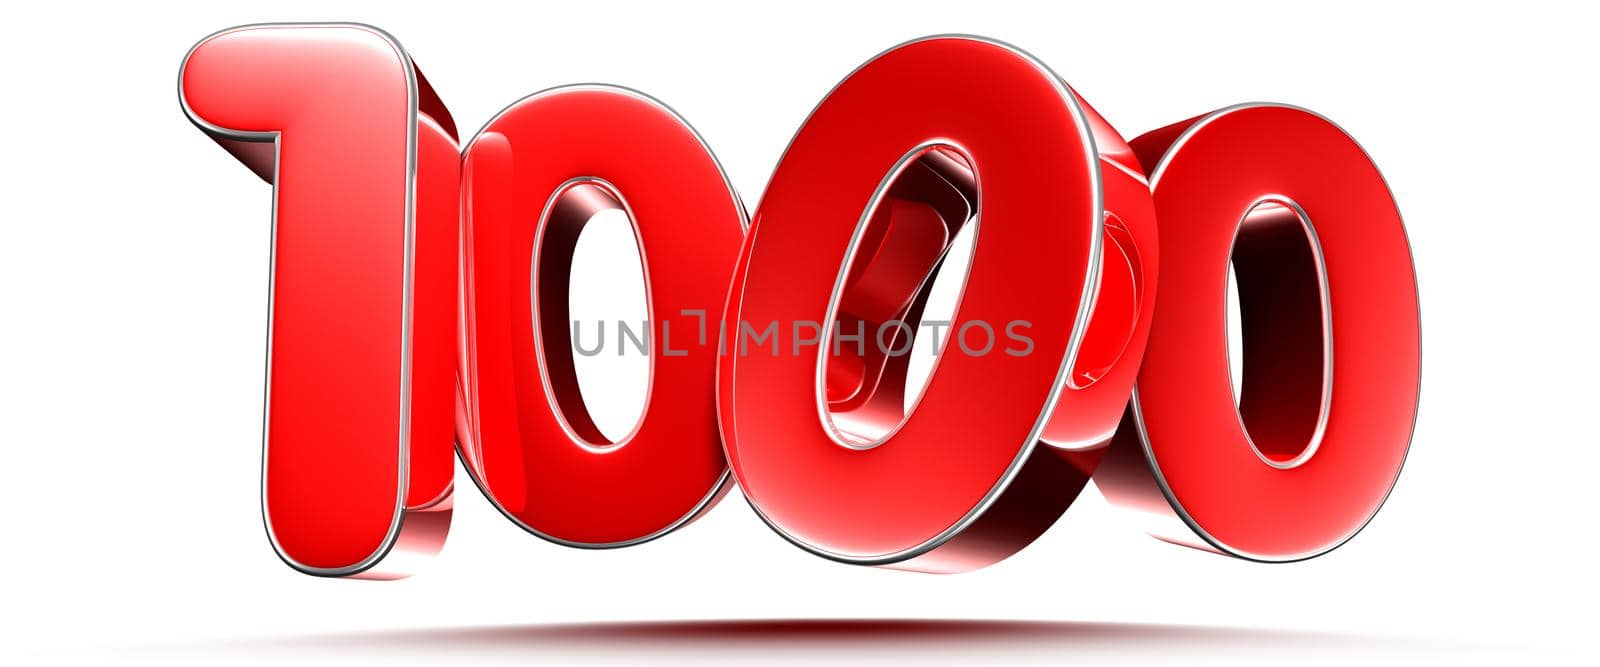 Rounded red numbers 1000 on white background 3D illustration with clipping path